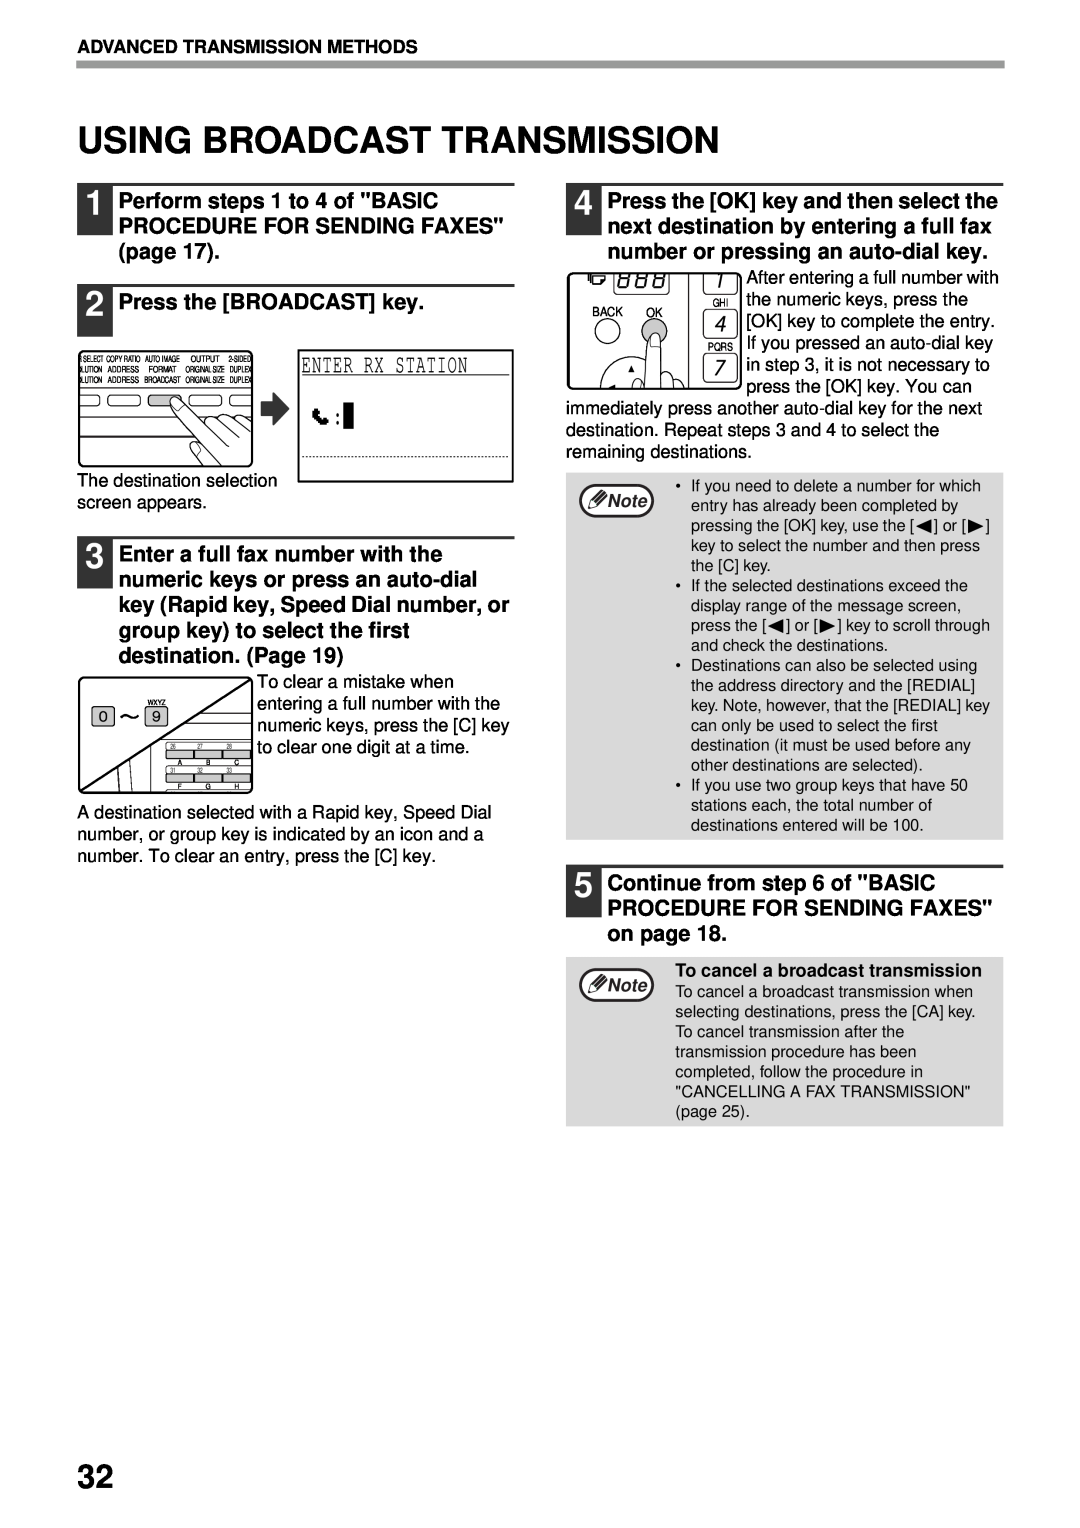 Sharp MX-FX13 appendix Using Broadcast Transmission, Perform steps 1 to 4 of BASIC PROCEDURE FOR SENDING FAXES page 